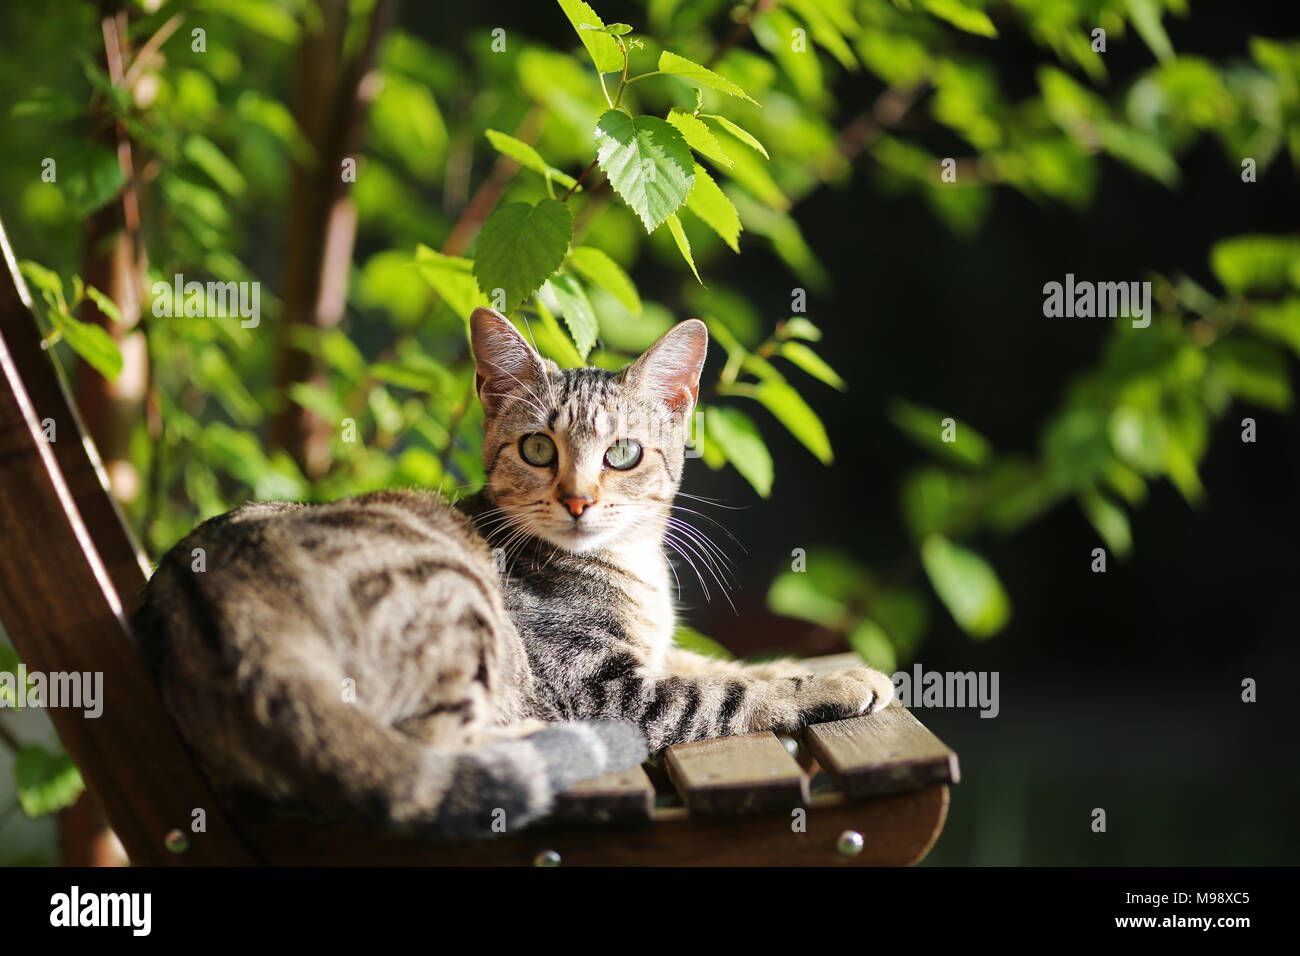 A tabby cat with green eyes sitting on a chair under a tree Stock Photo